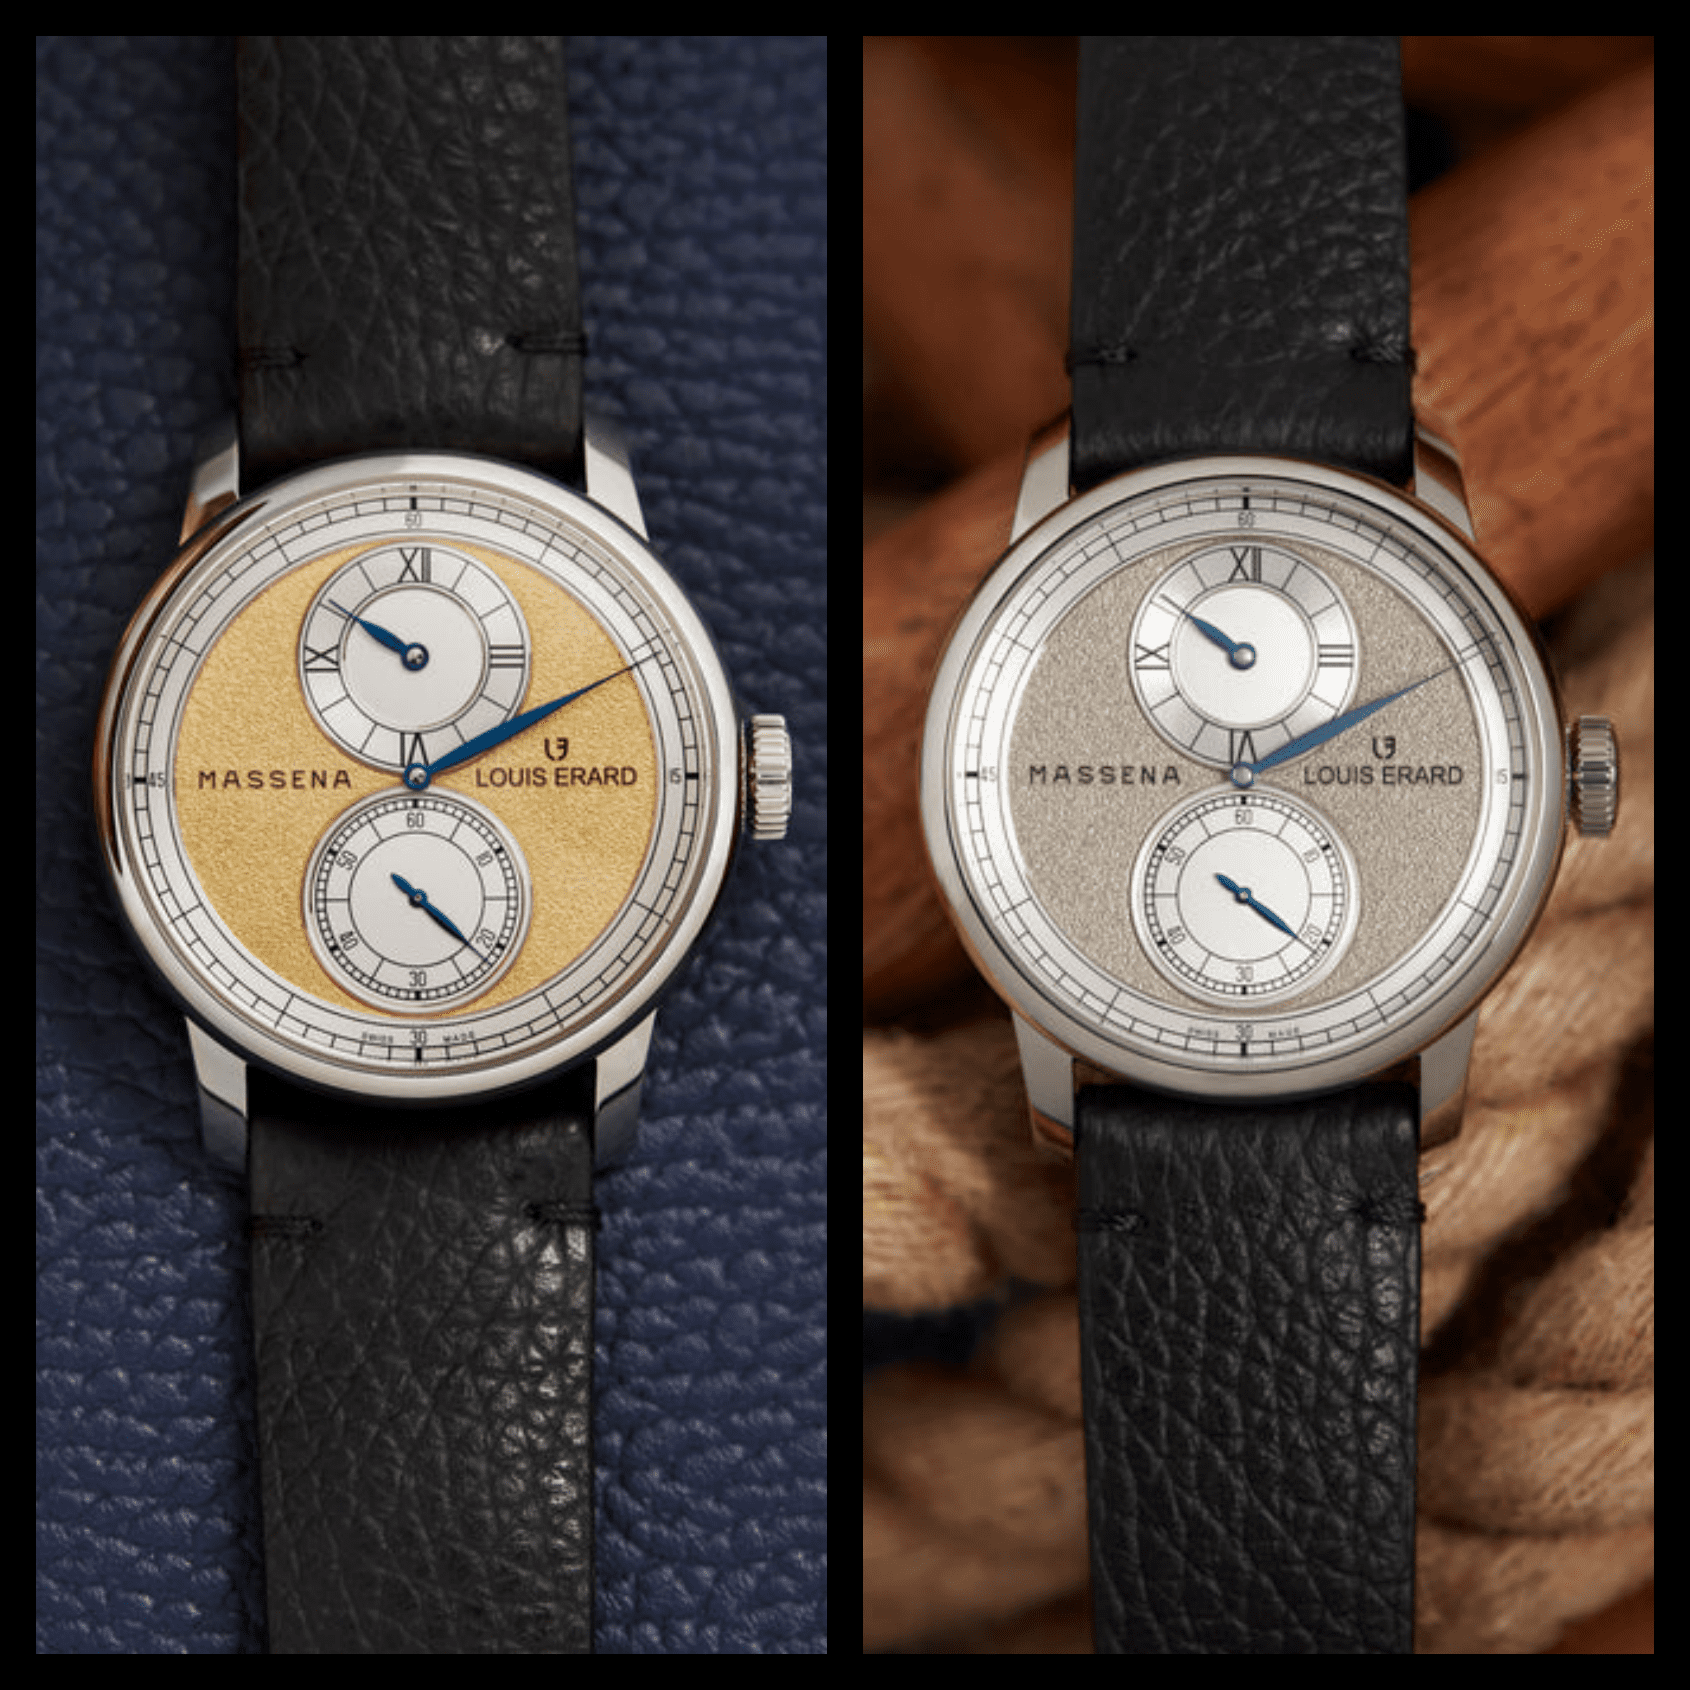 INTRODUCING: Louis Erard x Massena LAB team up to debut two frosty Le Régulateur limited editions